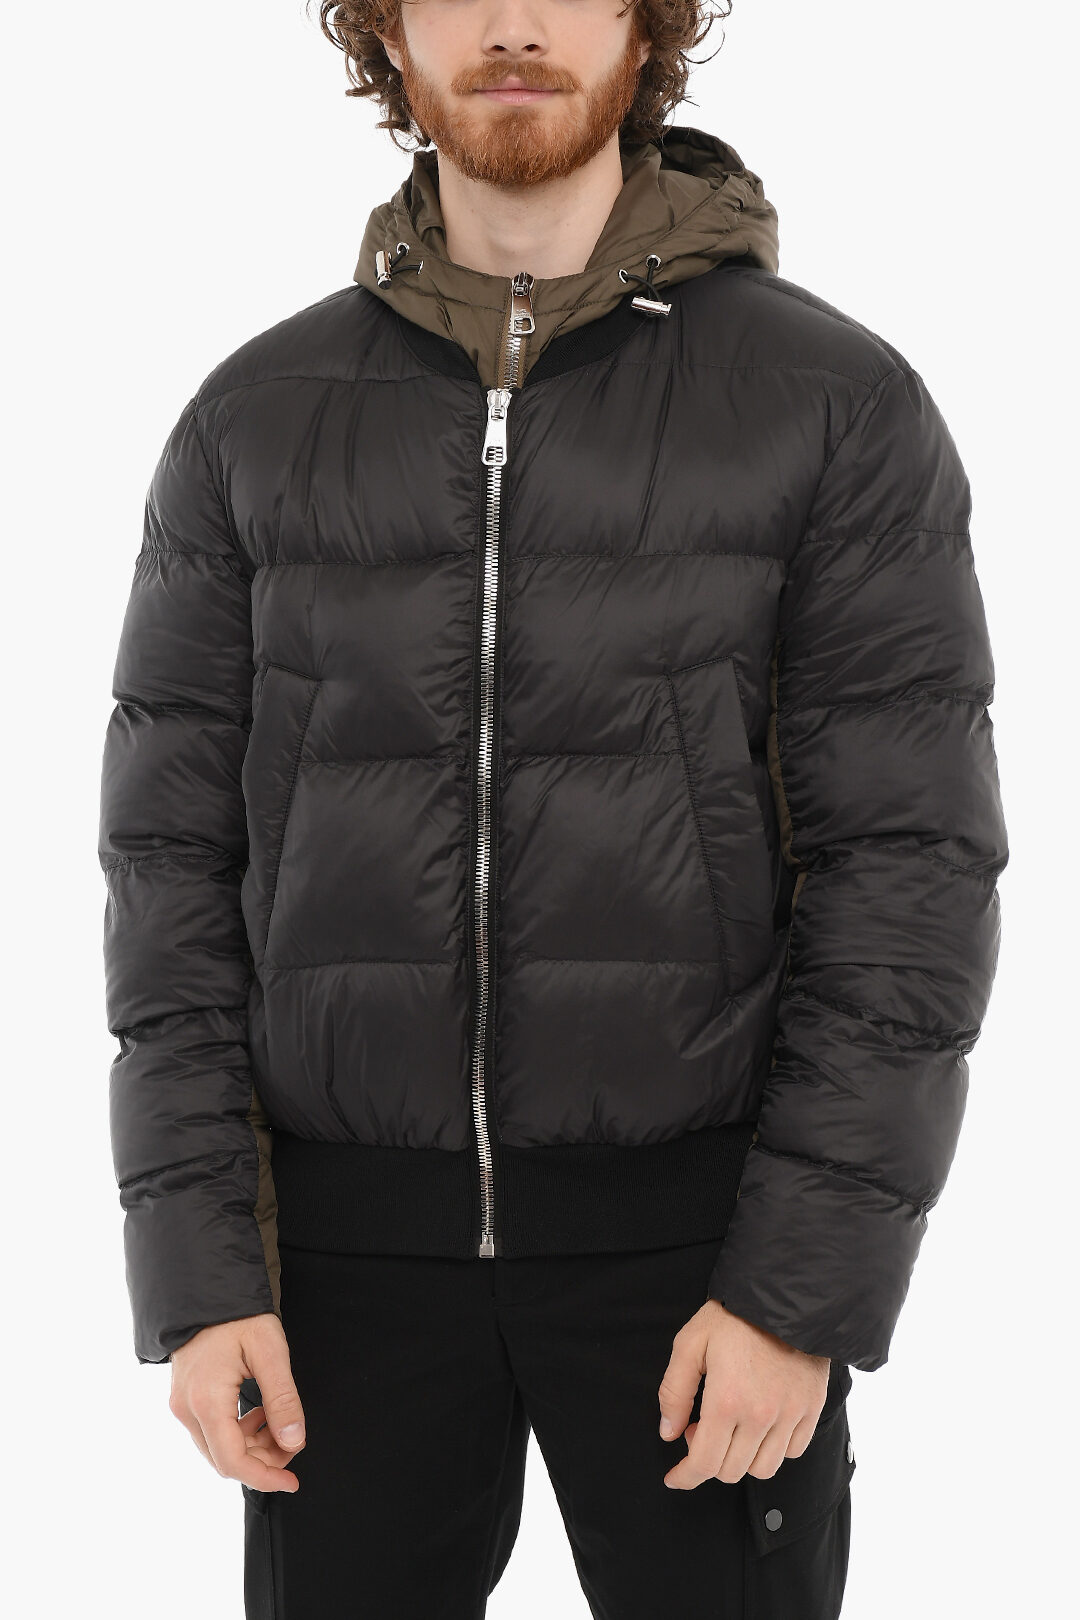 penfield padded bomber jacket with removable chest piece 1357677 zoom